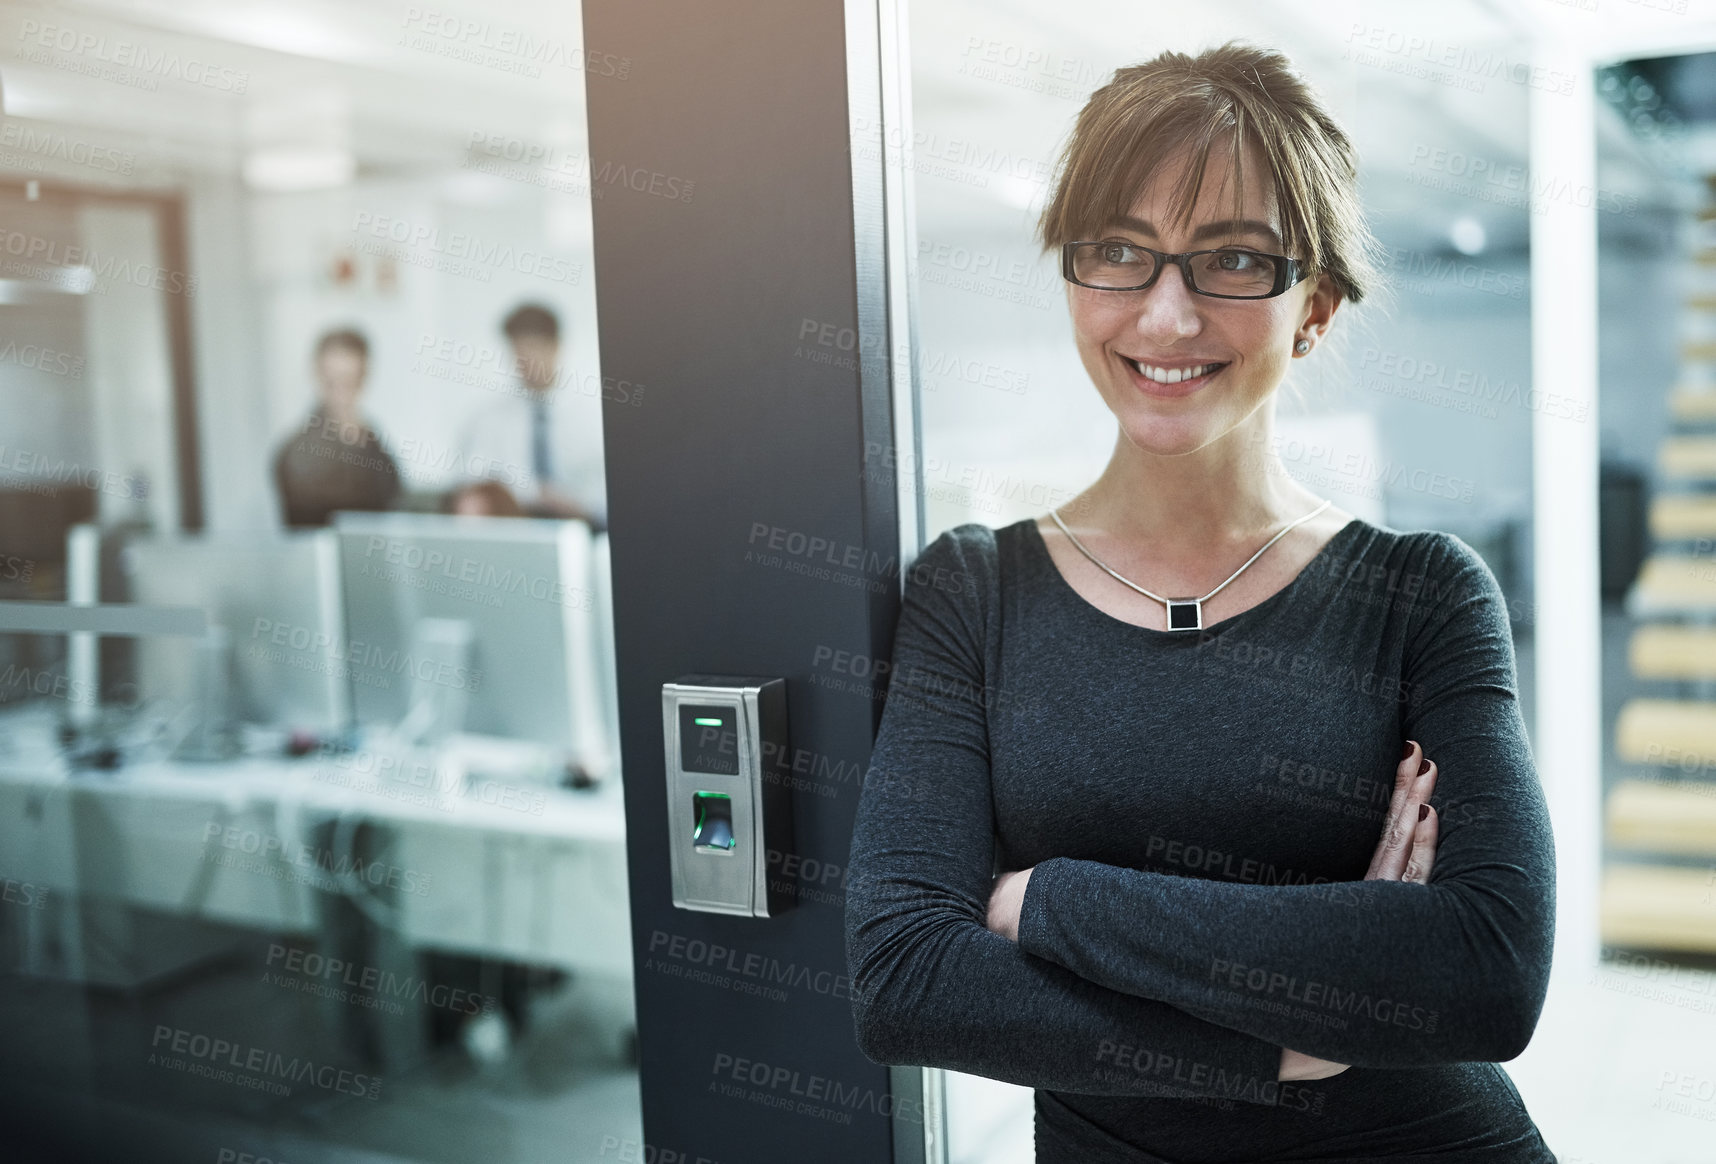 Buy stock photo Shot of a young businesswoman standing with her arms crossed in an office doorway